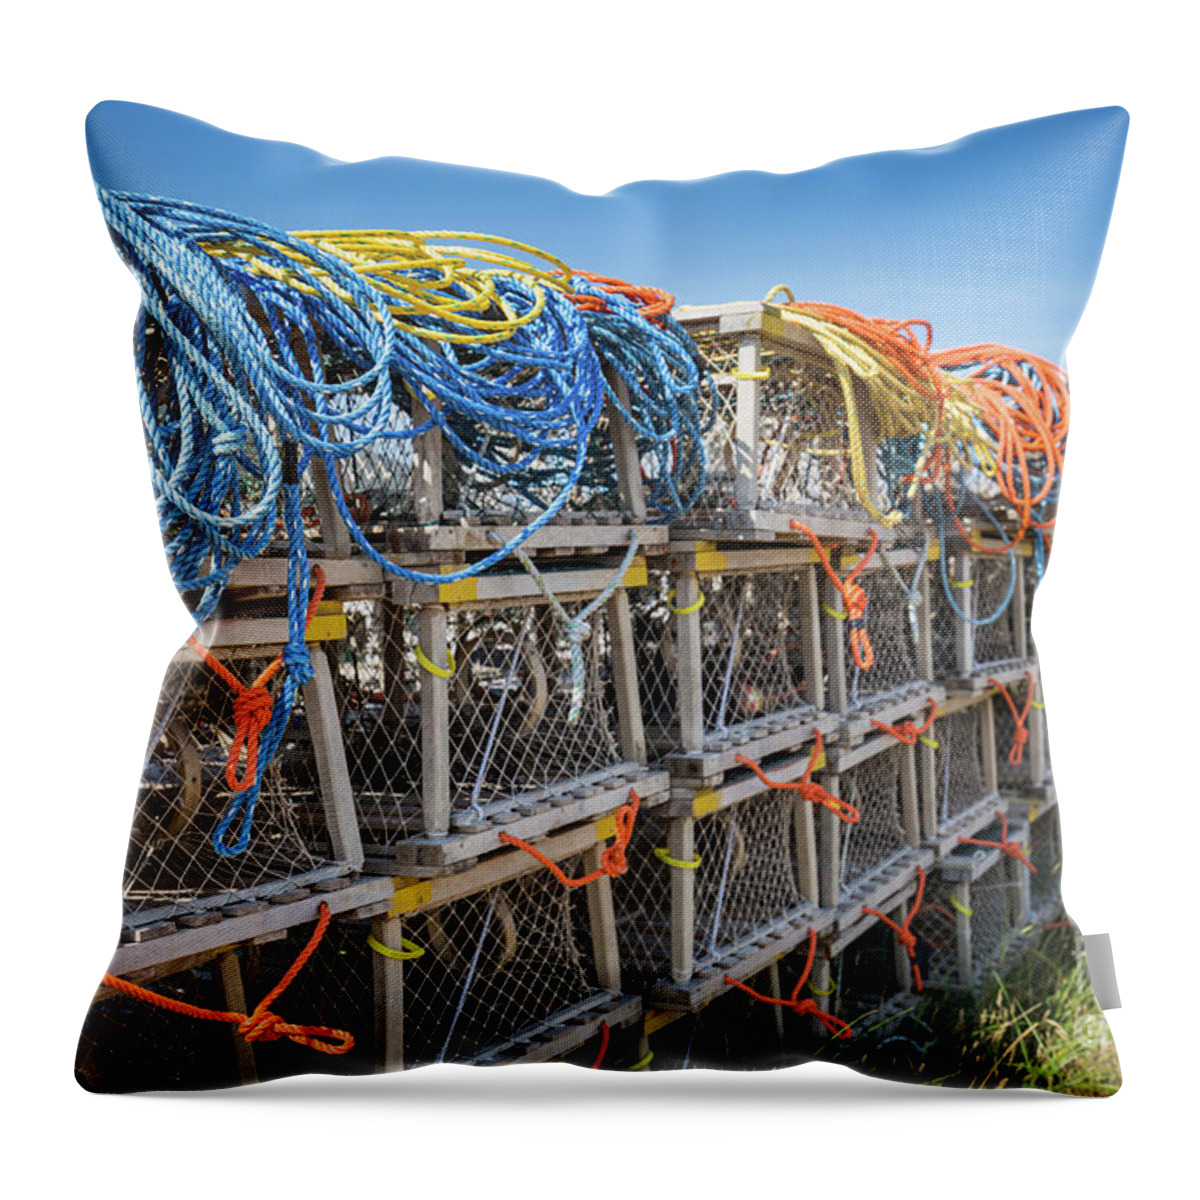 Lobster Traps Throw Pillow featuring the photograph Lobster Traps by Eva Lechner